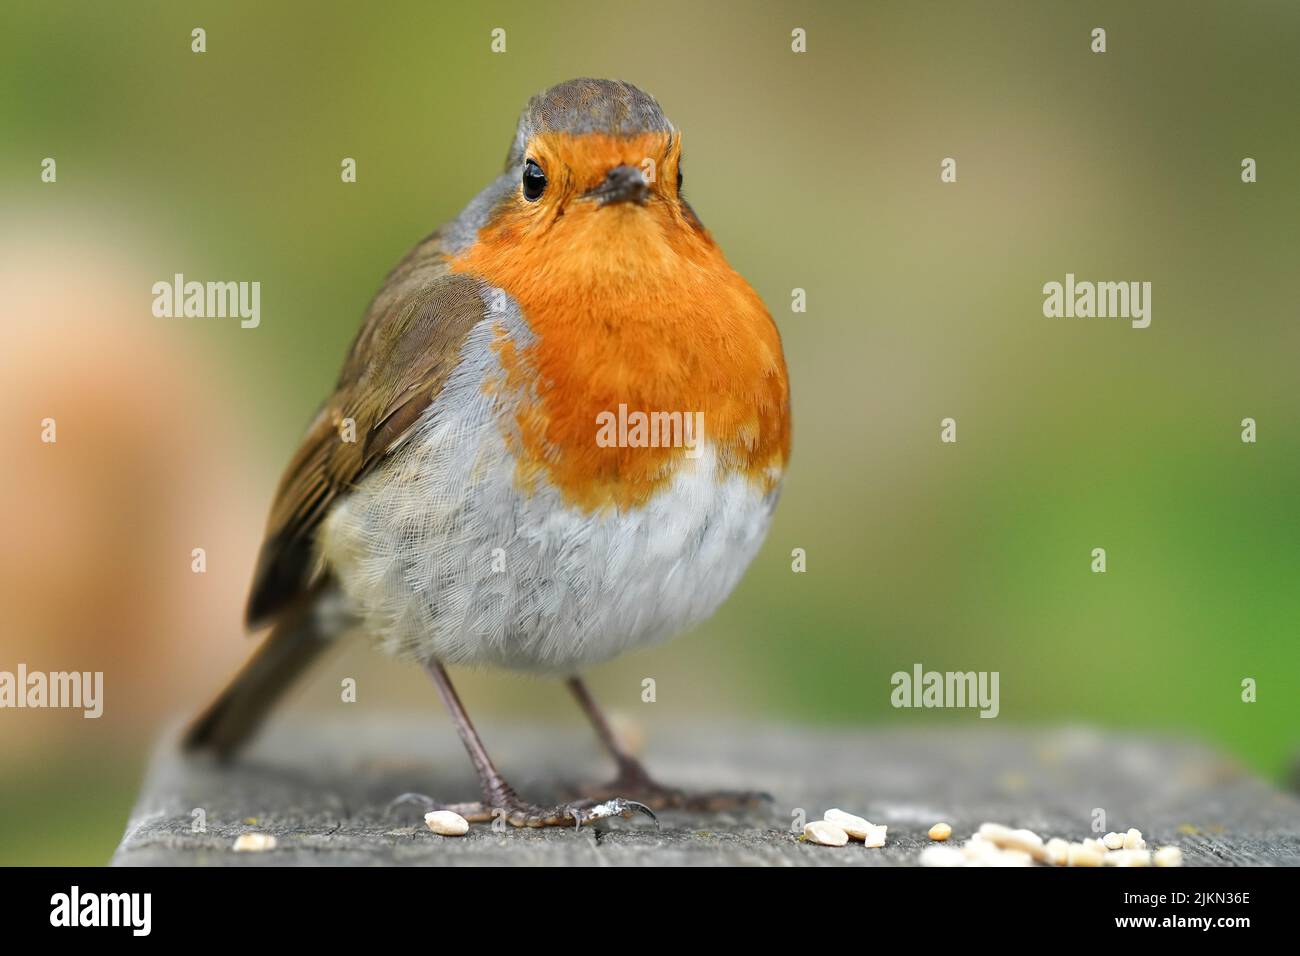 A closeup of a robin bird perching on concrete surface against a bokeh nature background Stock Photo